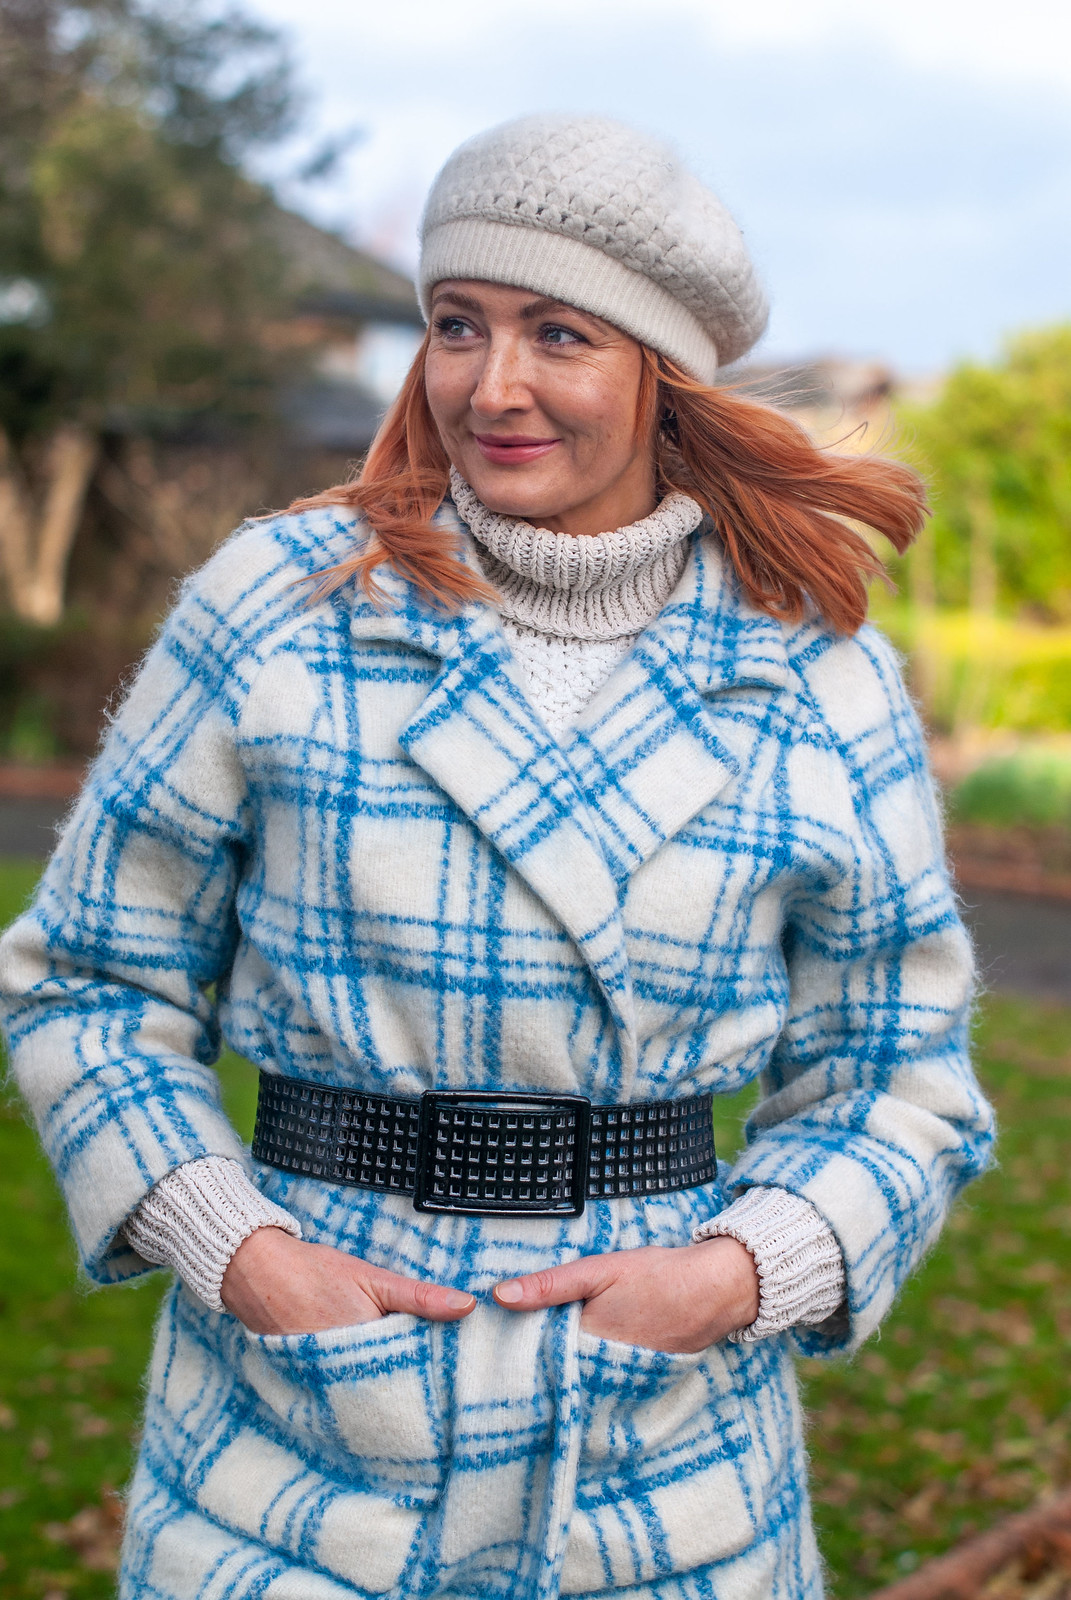 An Everyday Outfit: Winter Coat Worn 80s Style (blue check coat, belted) | Not Dressed As Lamb, Over 40 Fashion and Style